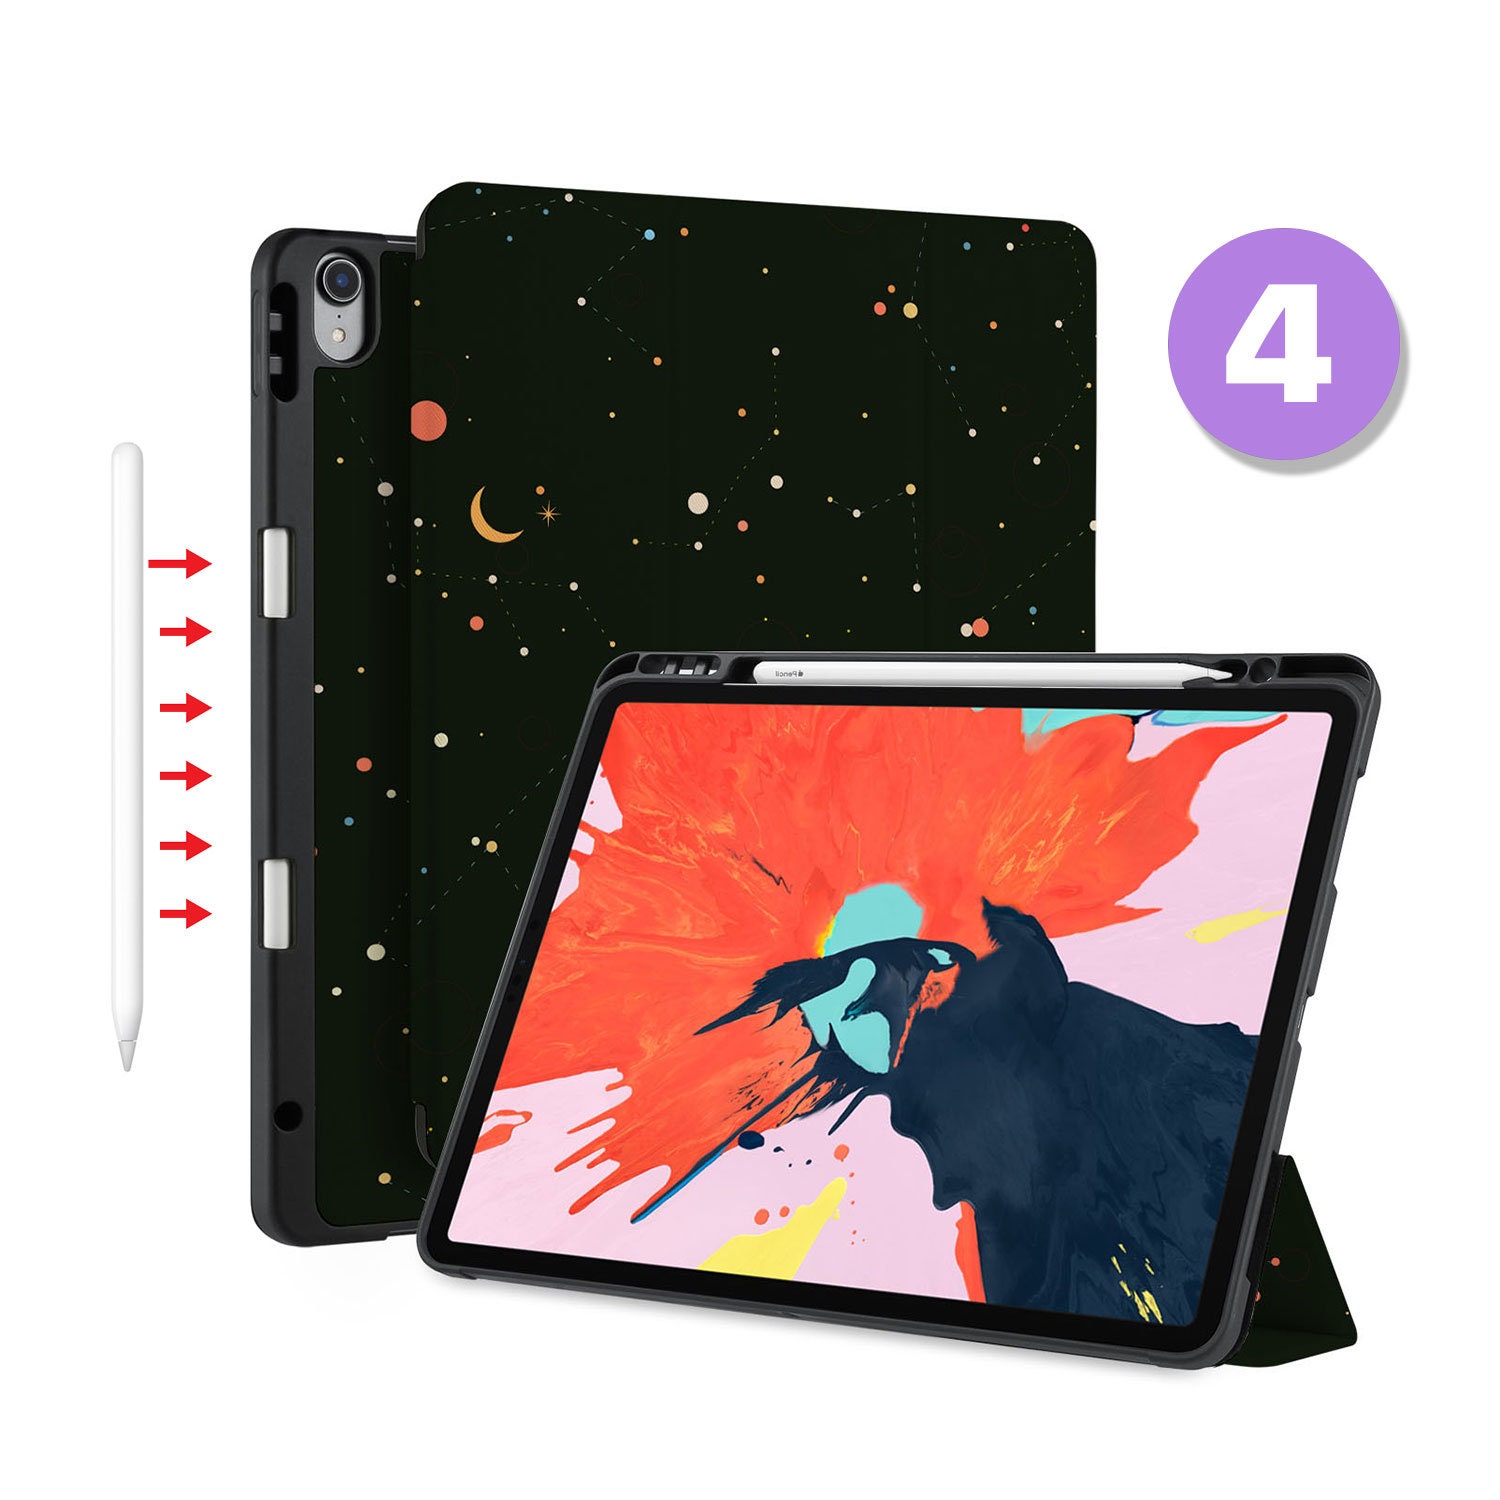 Voorzien toernooi bedrijf Ipad Magnetic Smart Case With Pencil Holder for Ipad 9.7 10.2 - Etsy